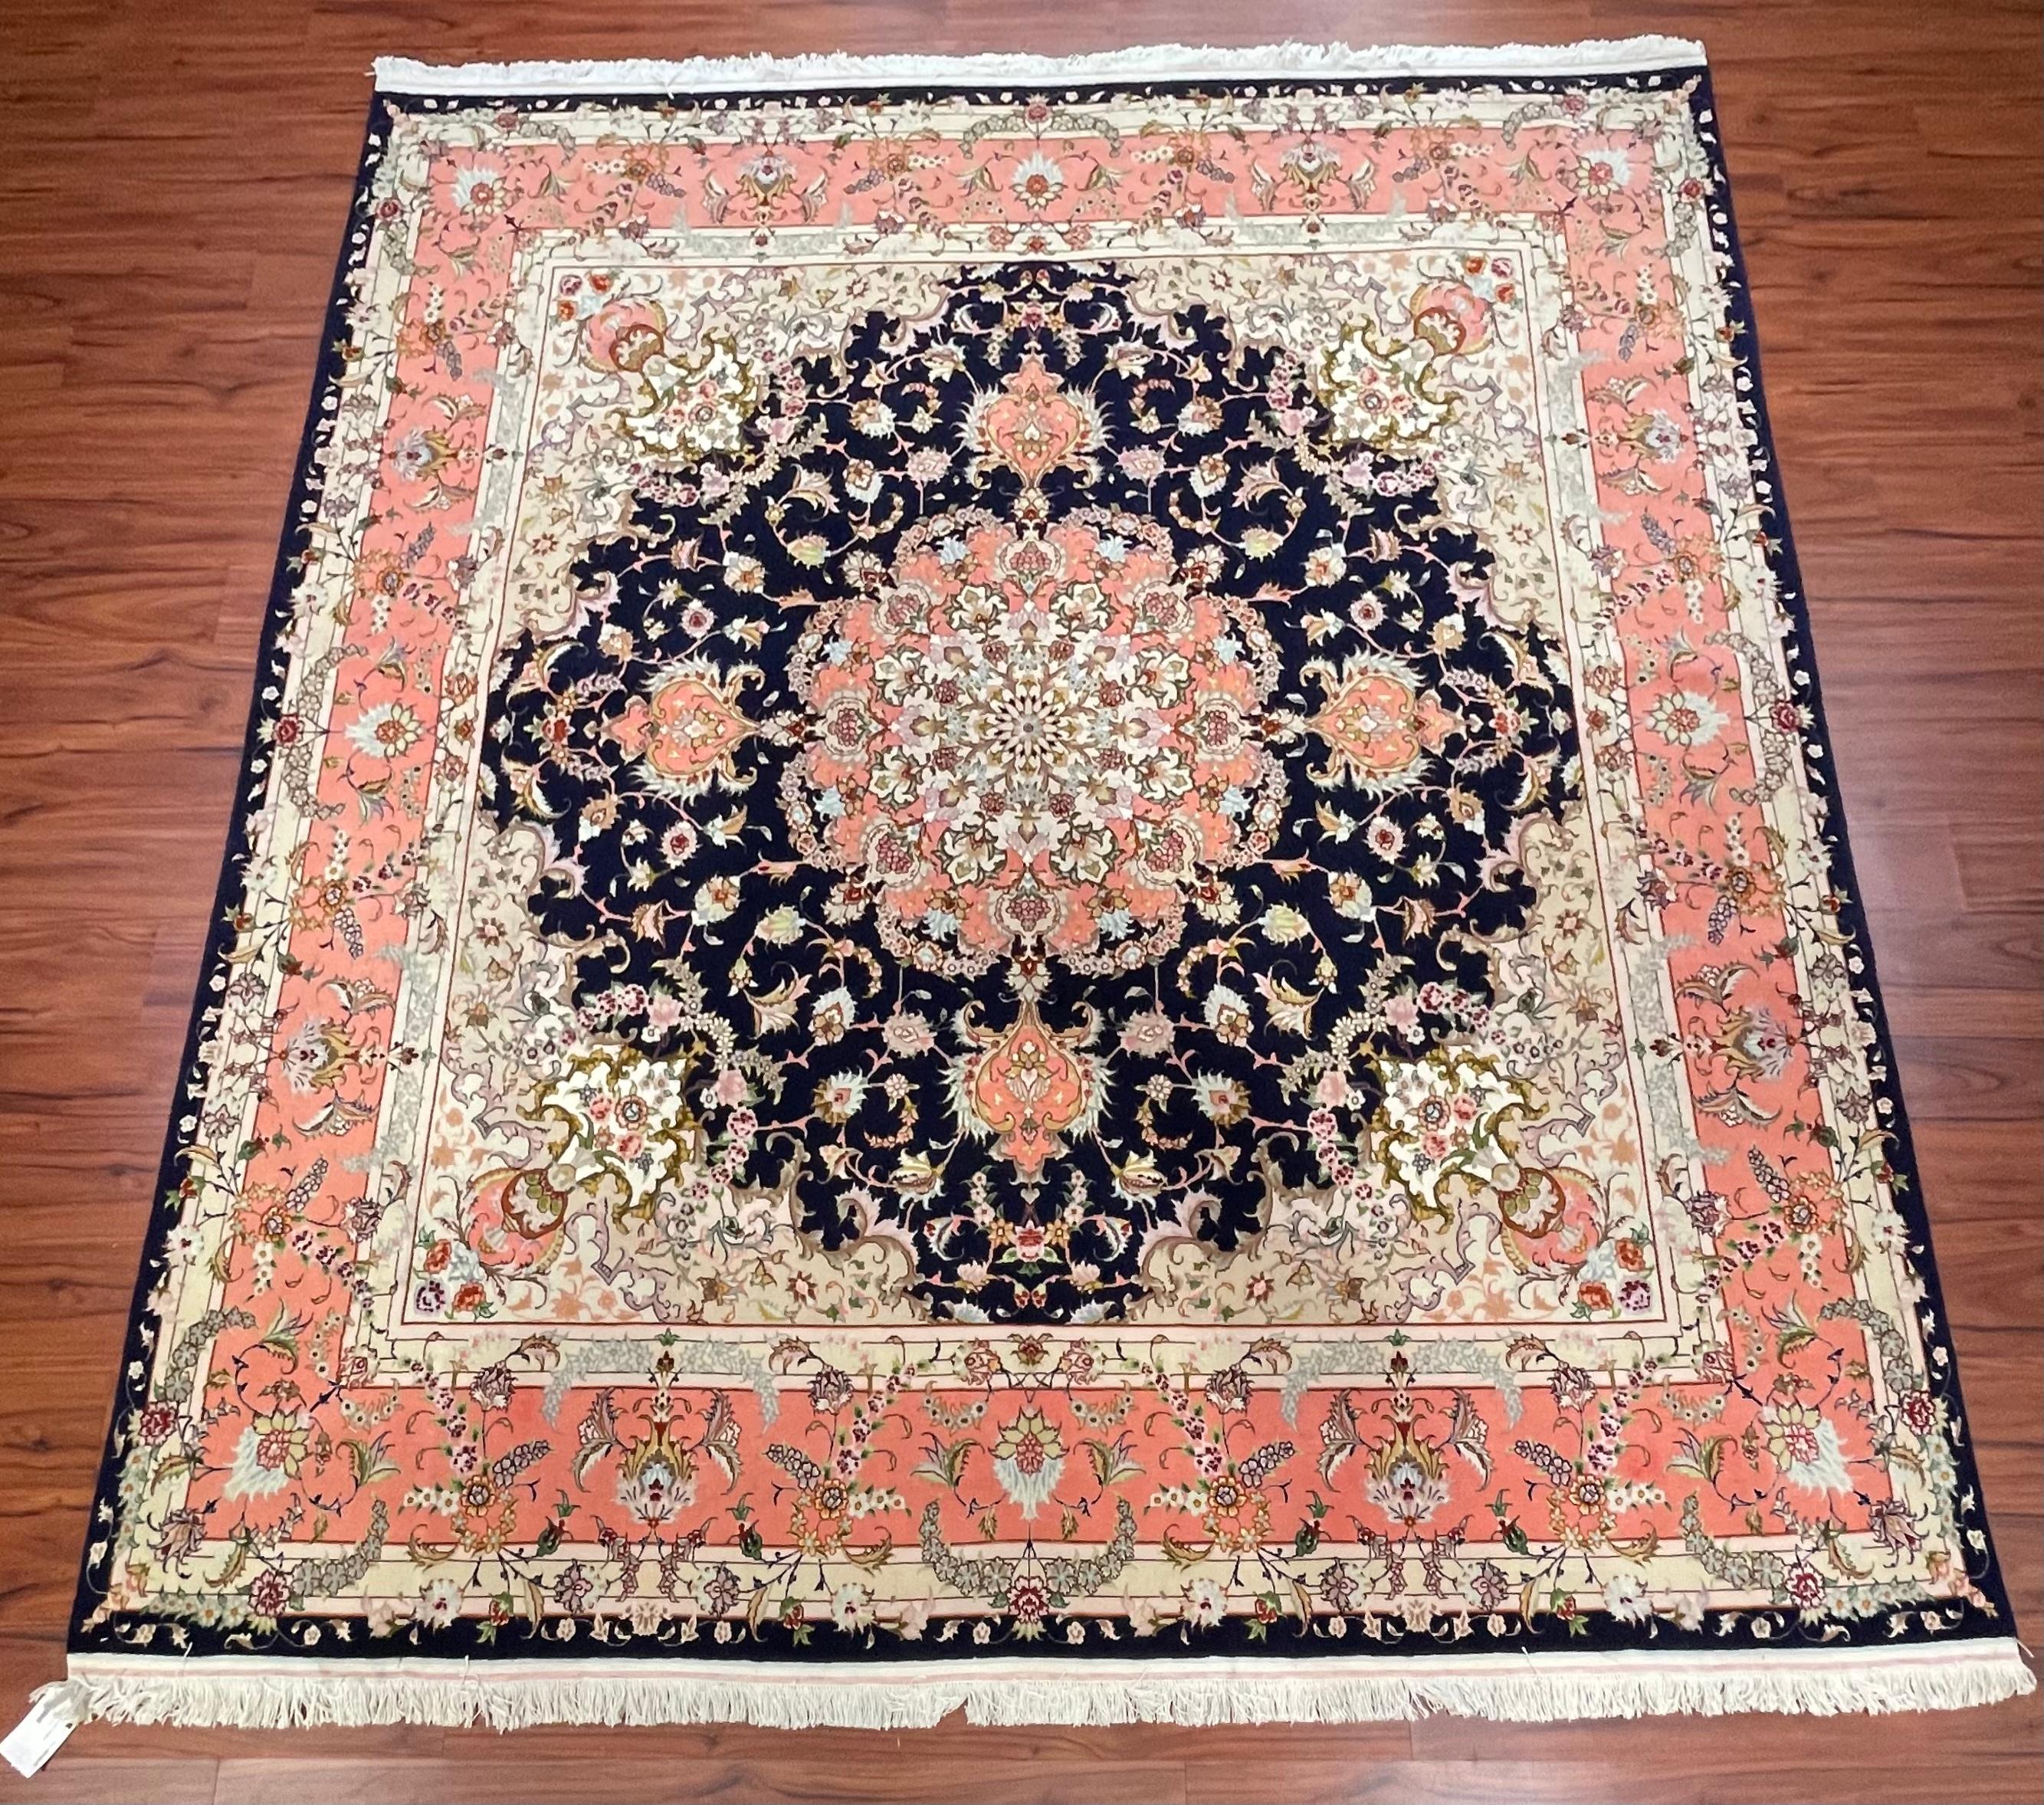 A stunning Persian Tabriz Rug originated from Iran in the late 20th century. This piece is hand-knotted and is made from a wool and silk blend. This Tabriz rug is in absolute excellent condition. Feel to message me with questions regarding this rug